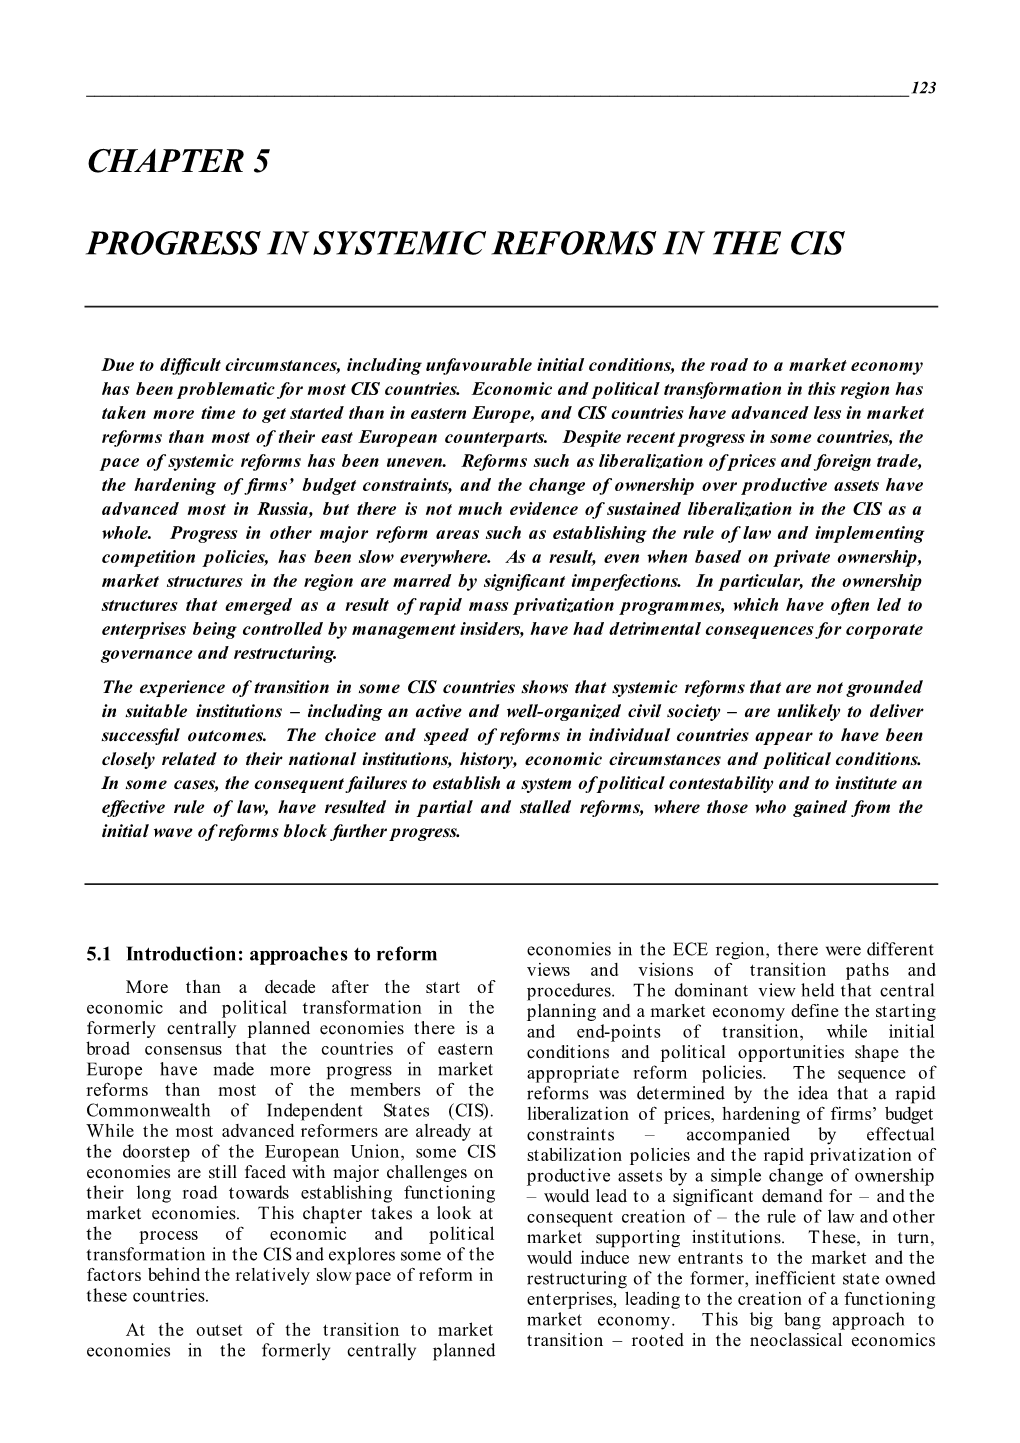 Chapter 5 Progress in Systemic Reforms in The